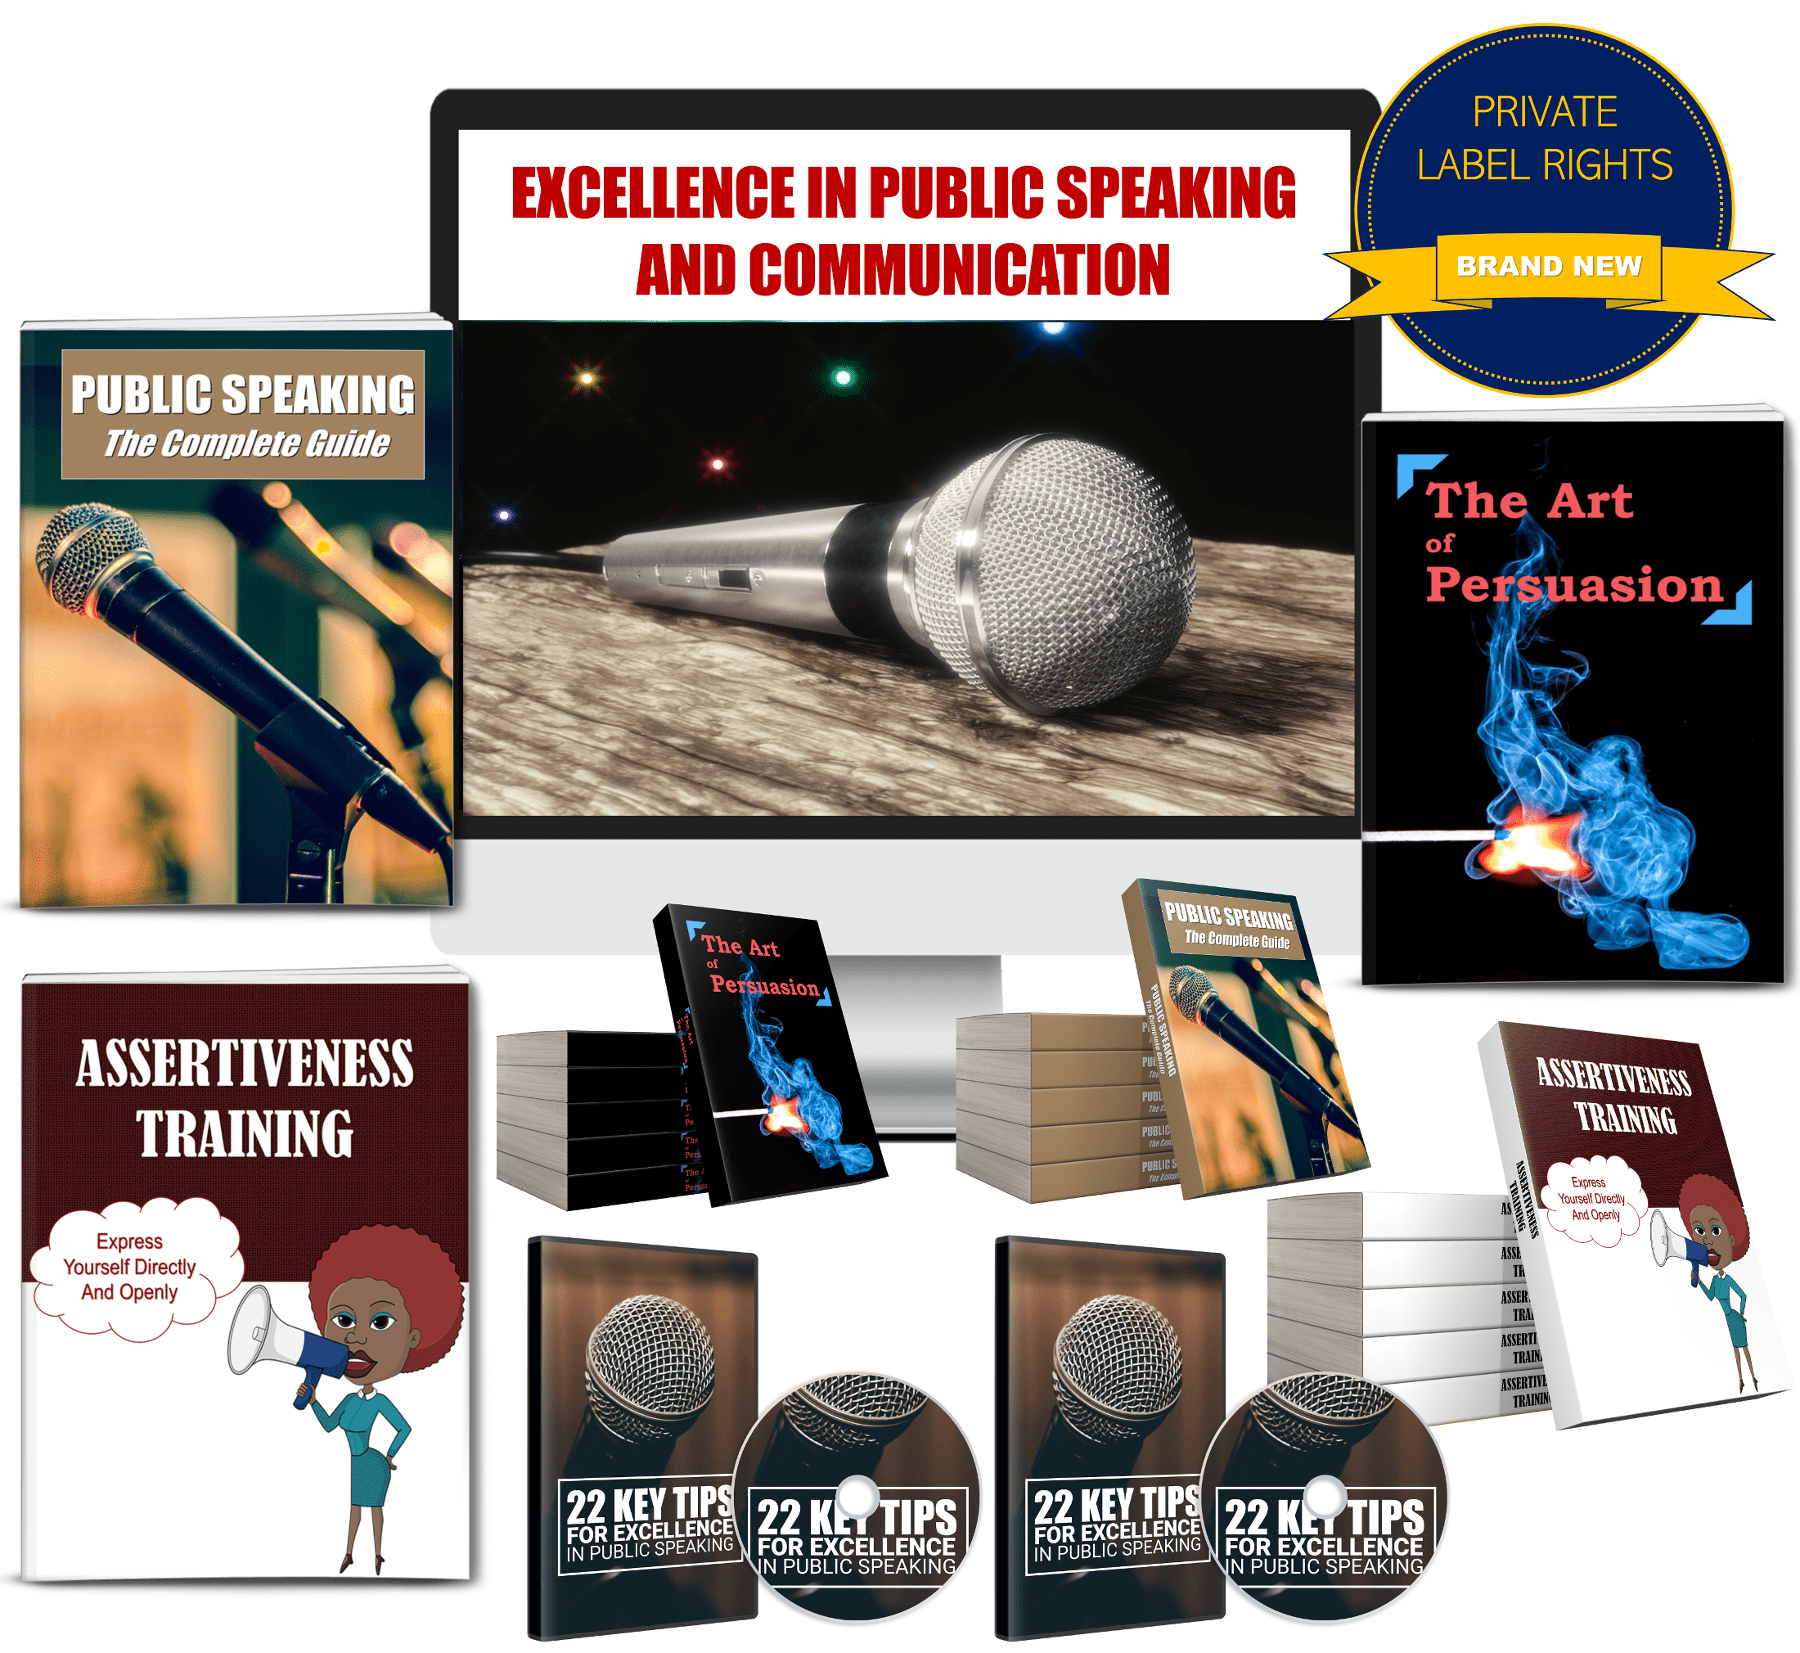 Public Speaking and Communication Content with PLR Rights